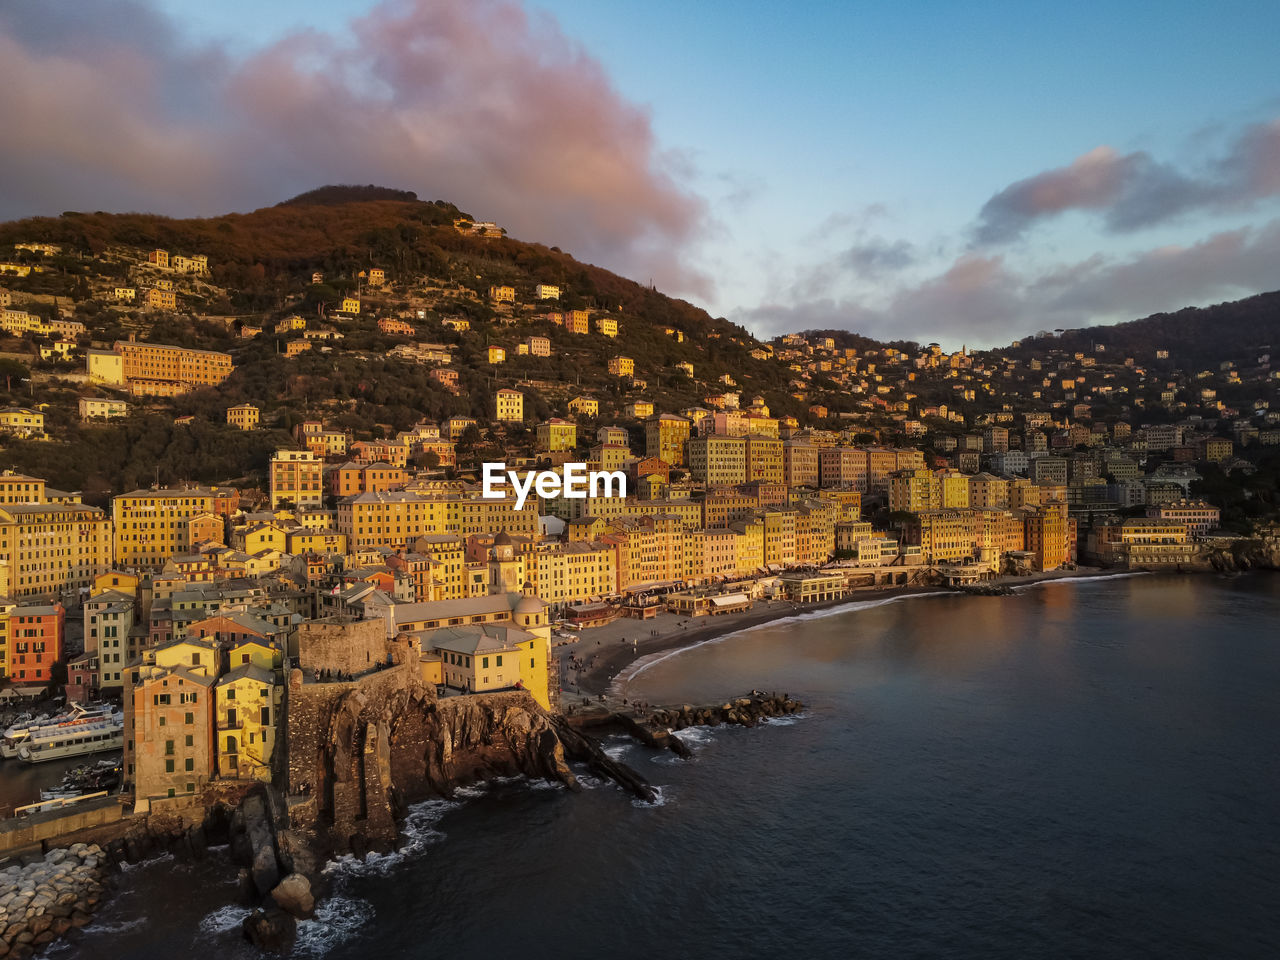 Waterfront buildings in camogli town